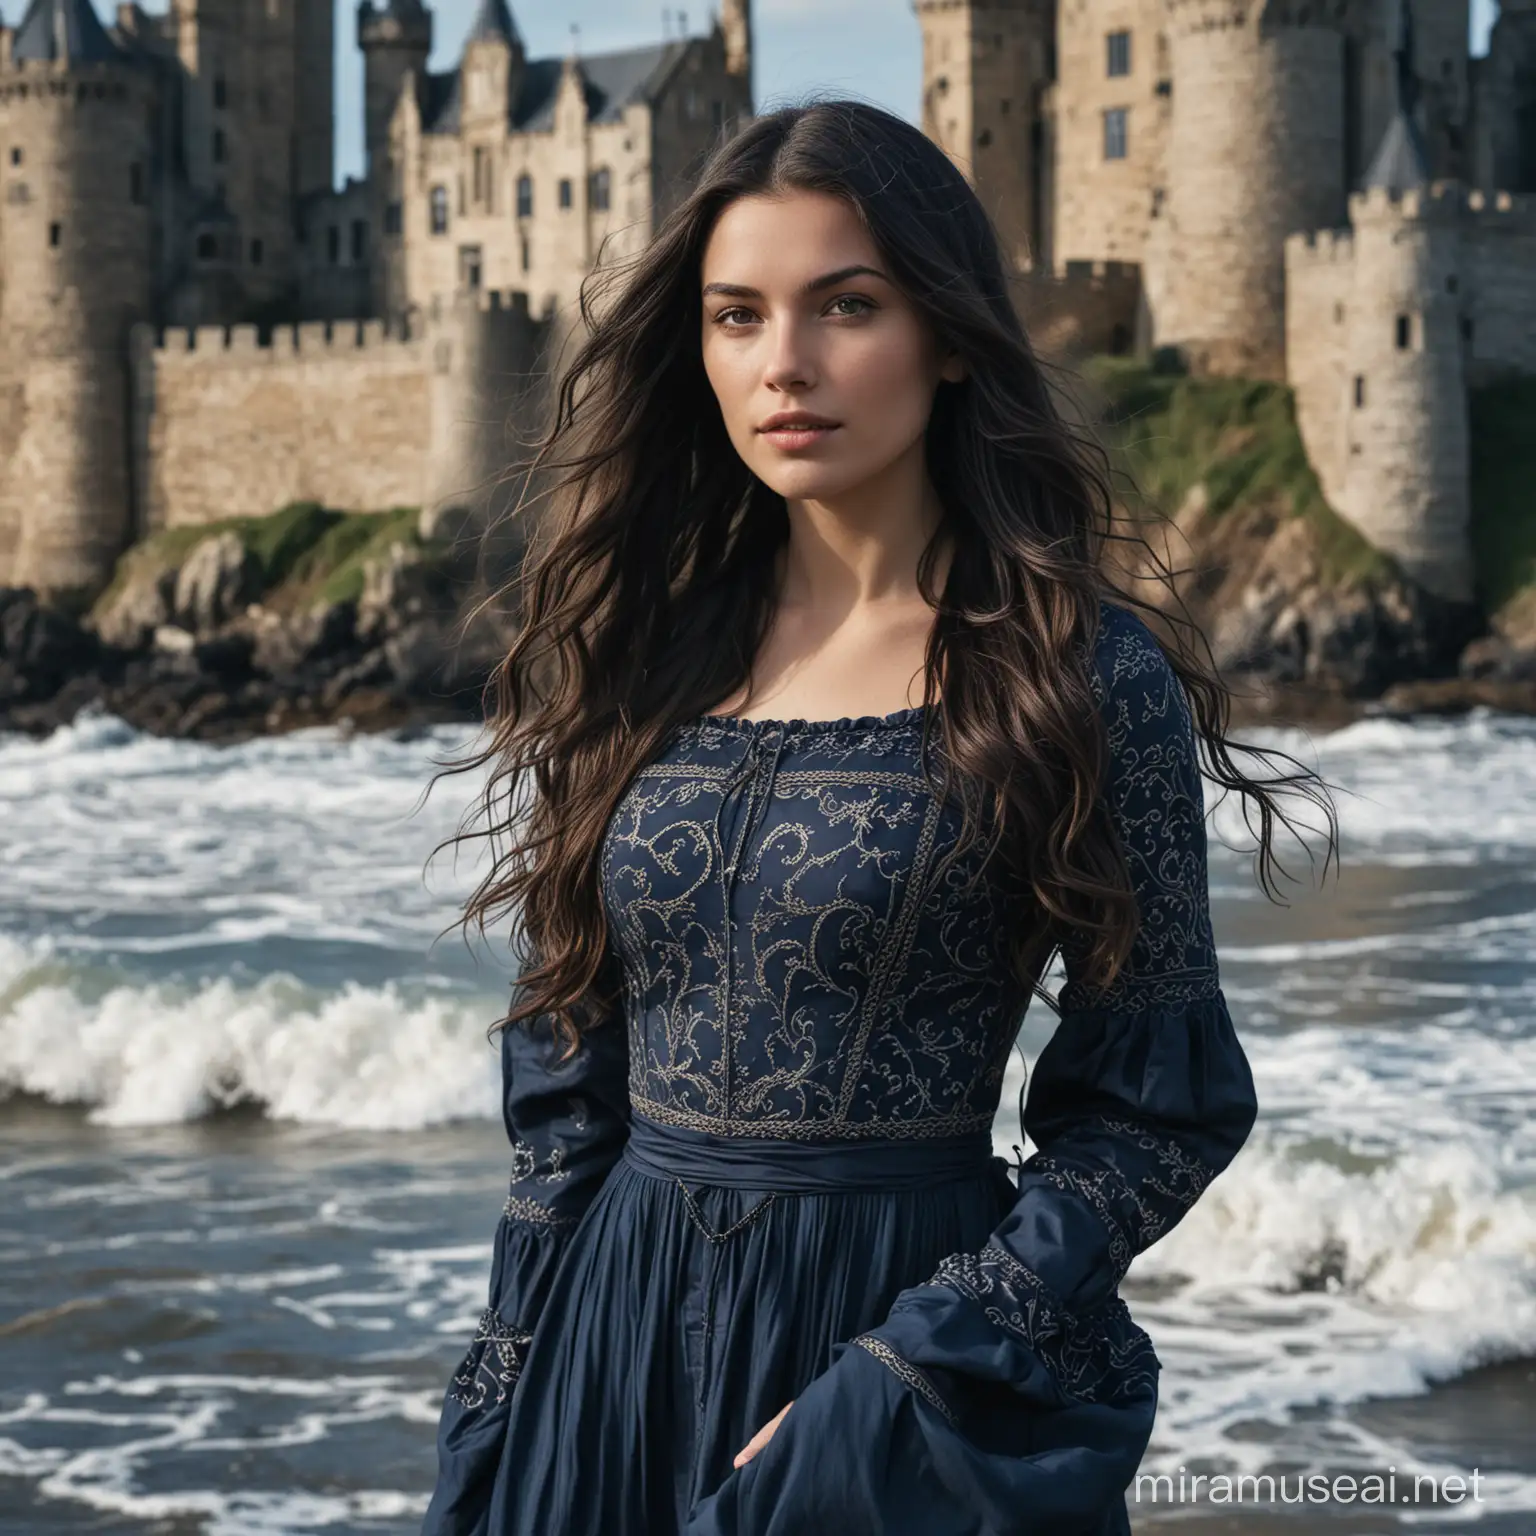 close up of young woman with long, dark hair down in waves, wearing a dark blue long sleeved dress with a medieval castle background